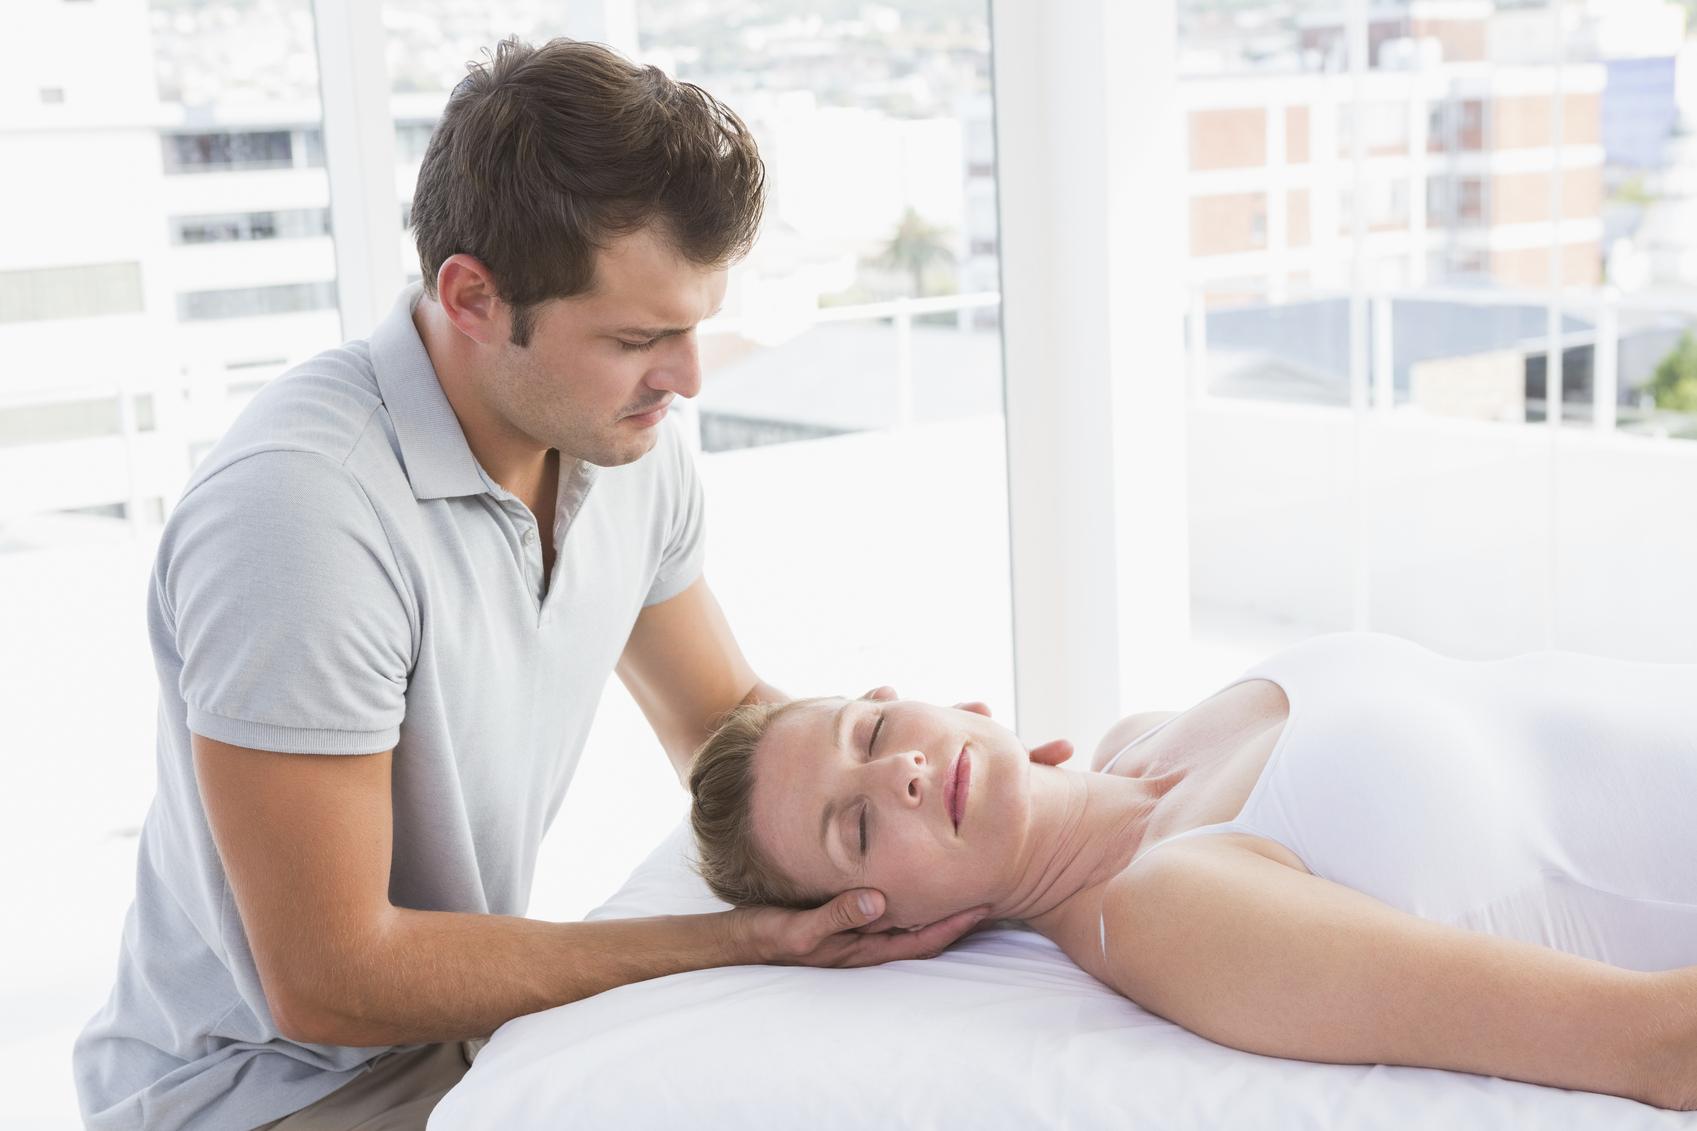 Massage Therapy Employee Benefits - Pros and Cons